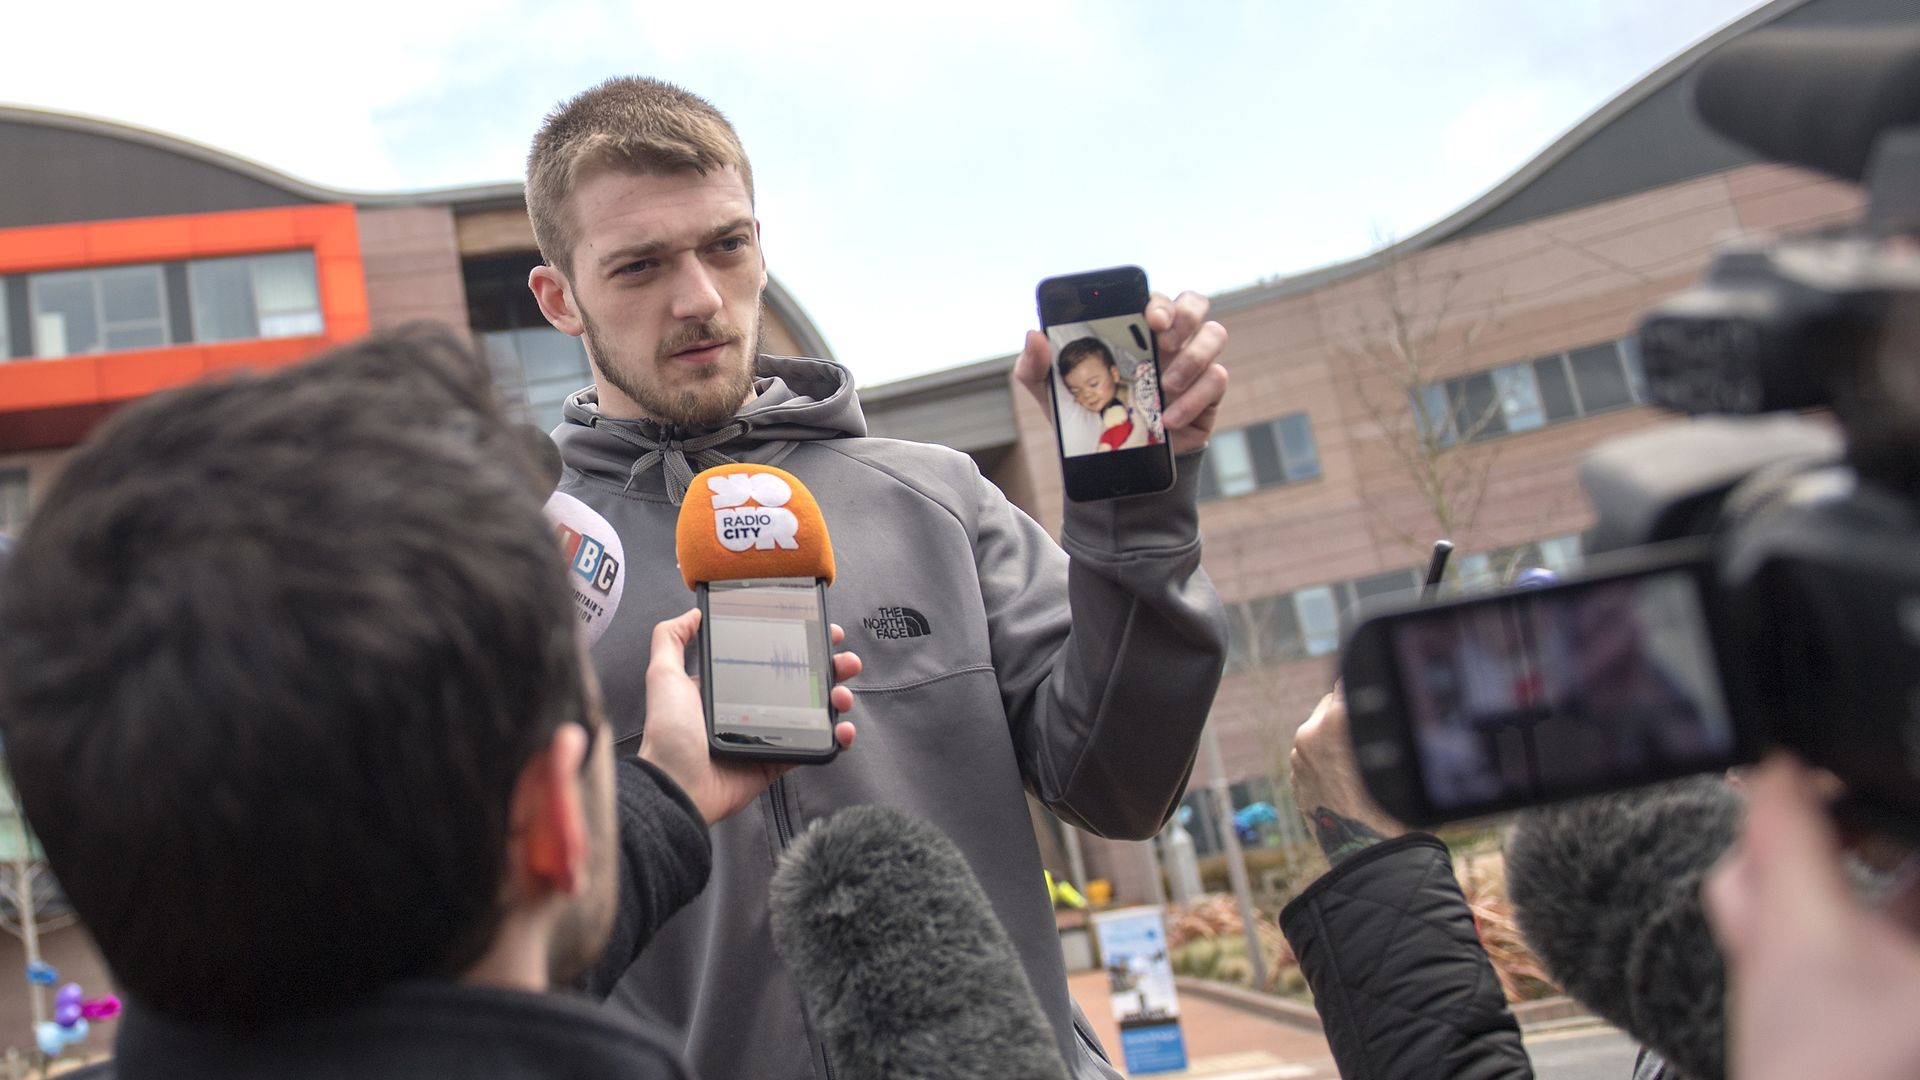 Tom Evans, Father of Alfie Evans, holds a photograph of his son as he speaks to media outside Alder Hey Children's Hospital.